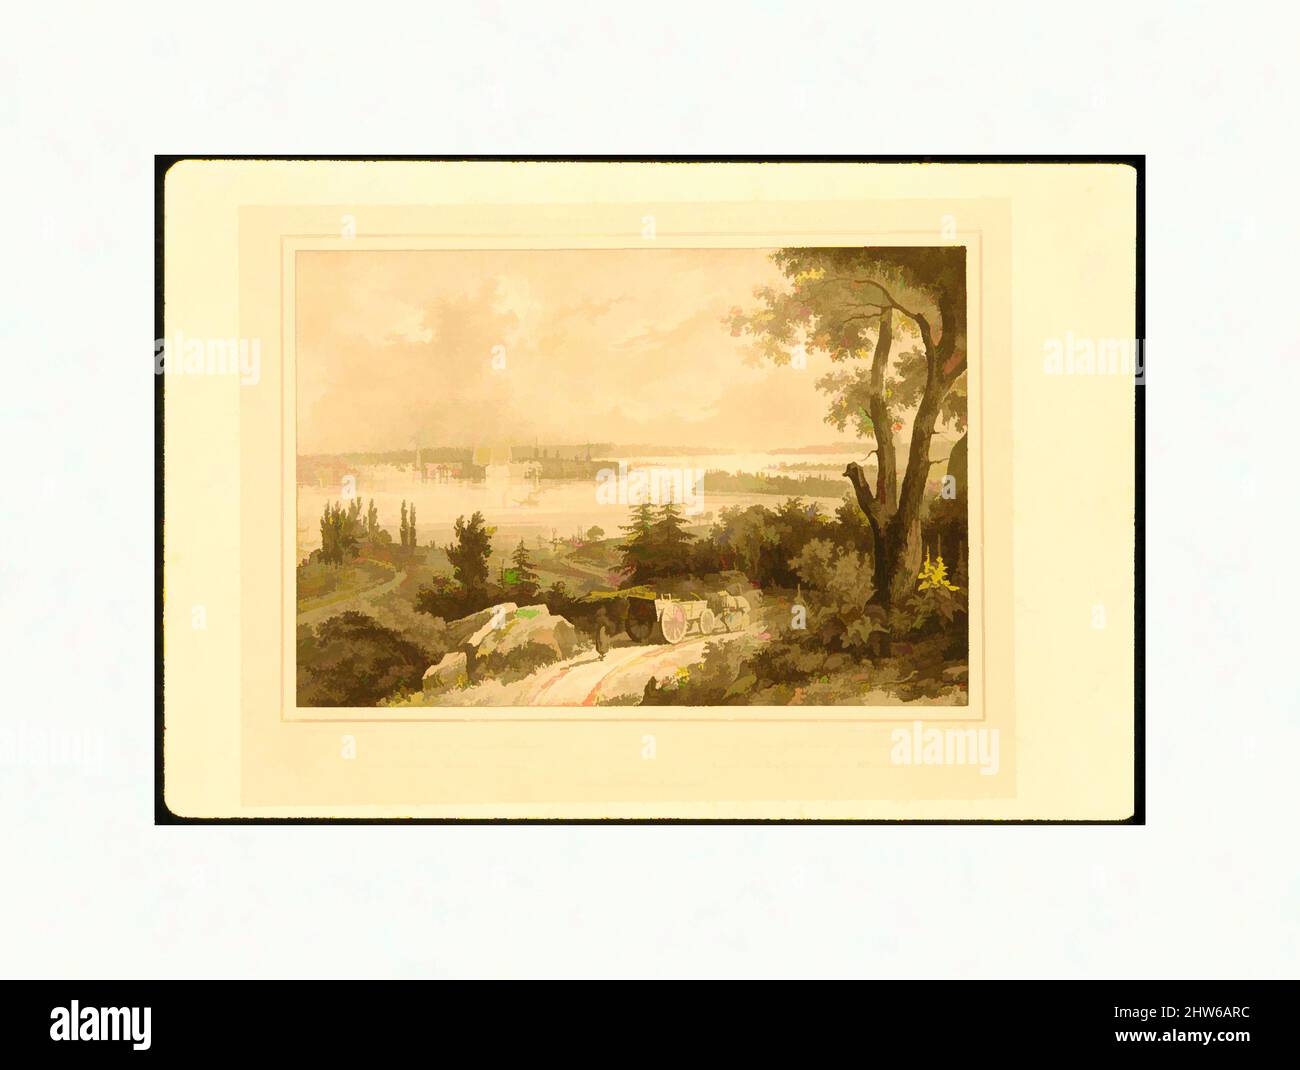 Art inspired by View of New York taken from Weehawken (Amérique Septentionale - État de New-York, plate 1), 1826, Lithograph, plate: 9 15/16 x 12 11/16 in. (25.2 x 32.3 cm), Prints, Isidore-Laurent Deroy (French, 1797–1886), After Jacques Gérard Milbert (French, Paris 1766–1840 Paris, Classic works modernized by Artotop with a splash of modernity. Shapes, color and value, eye-catching visual impact on art. Emotions through freedom of artworks in a contemporary way. A timeless message pursuing a wildly creative new direction. Artists turning to the digital medium and creating the Artotop NFT Stock Photo